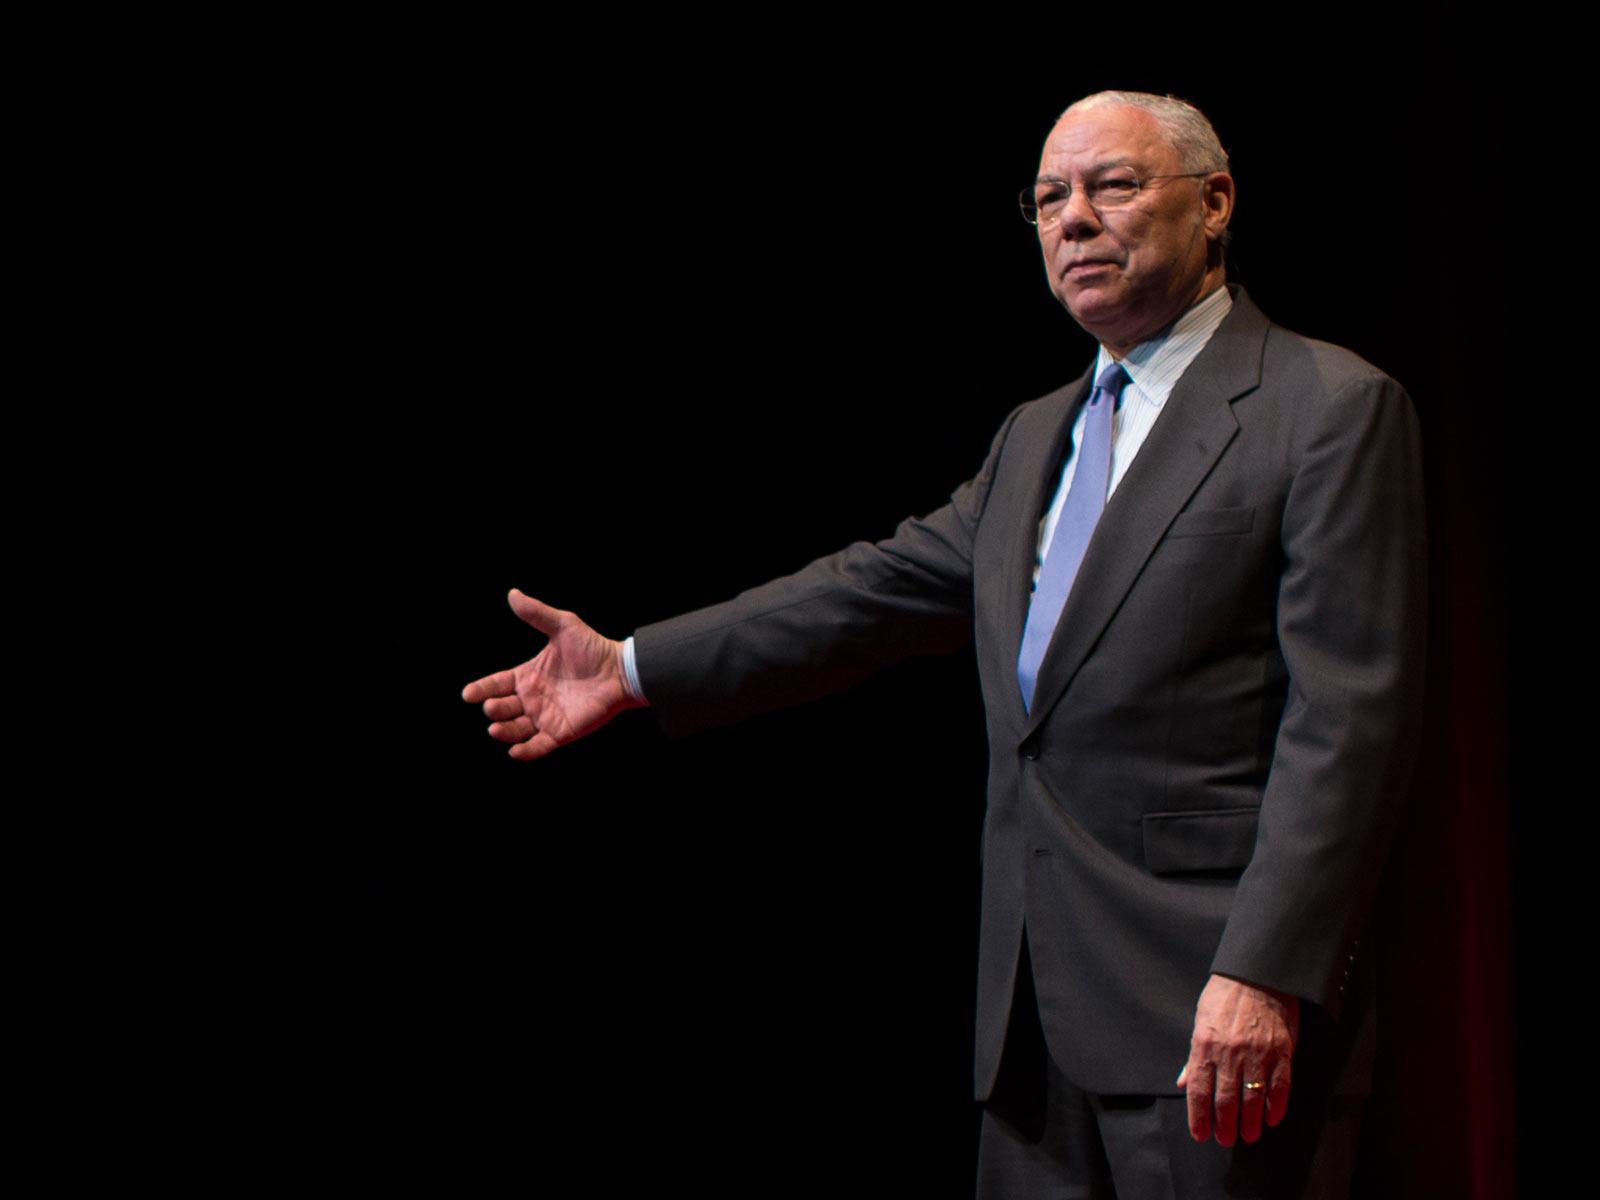 Kids need structure | Colin Powell